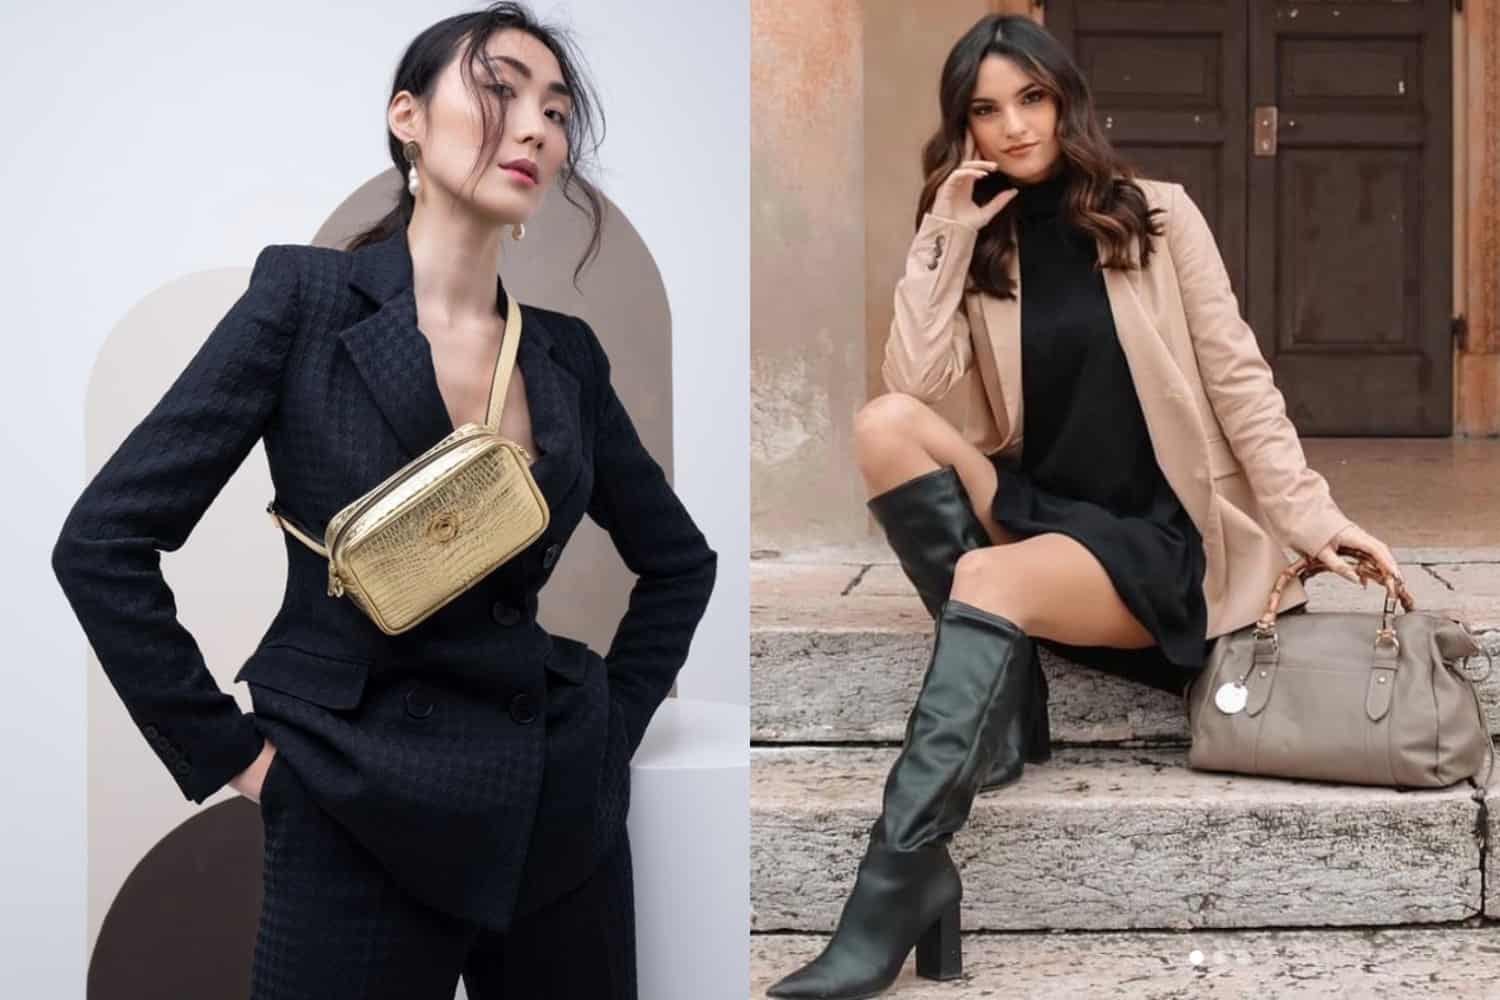 The Handbag Italian Influencers Are Obsessed With